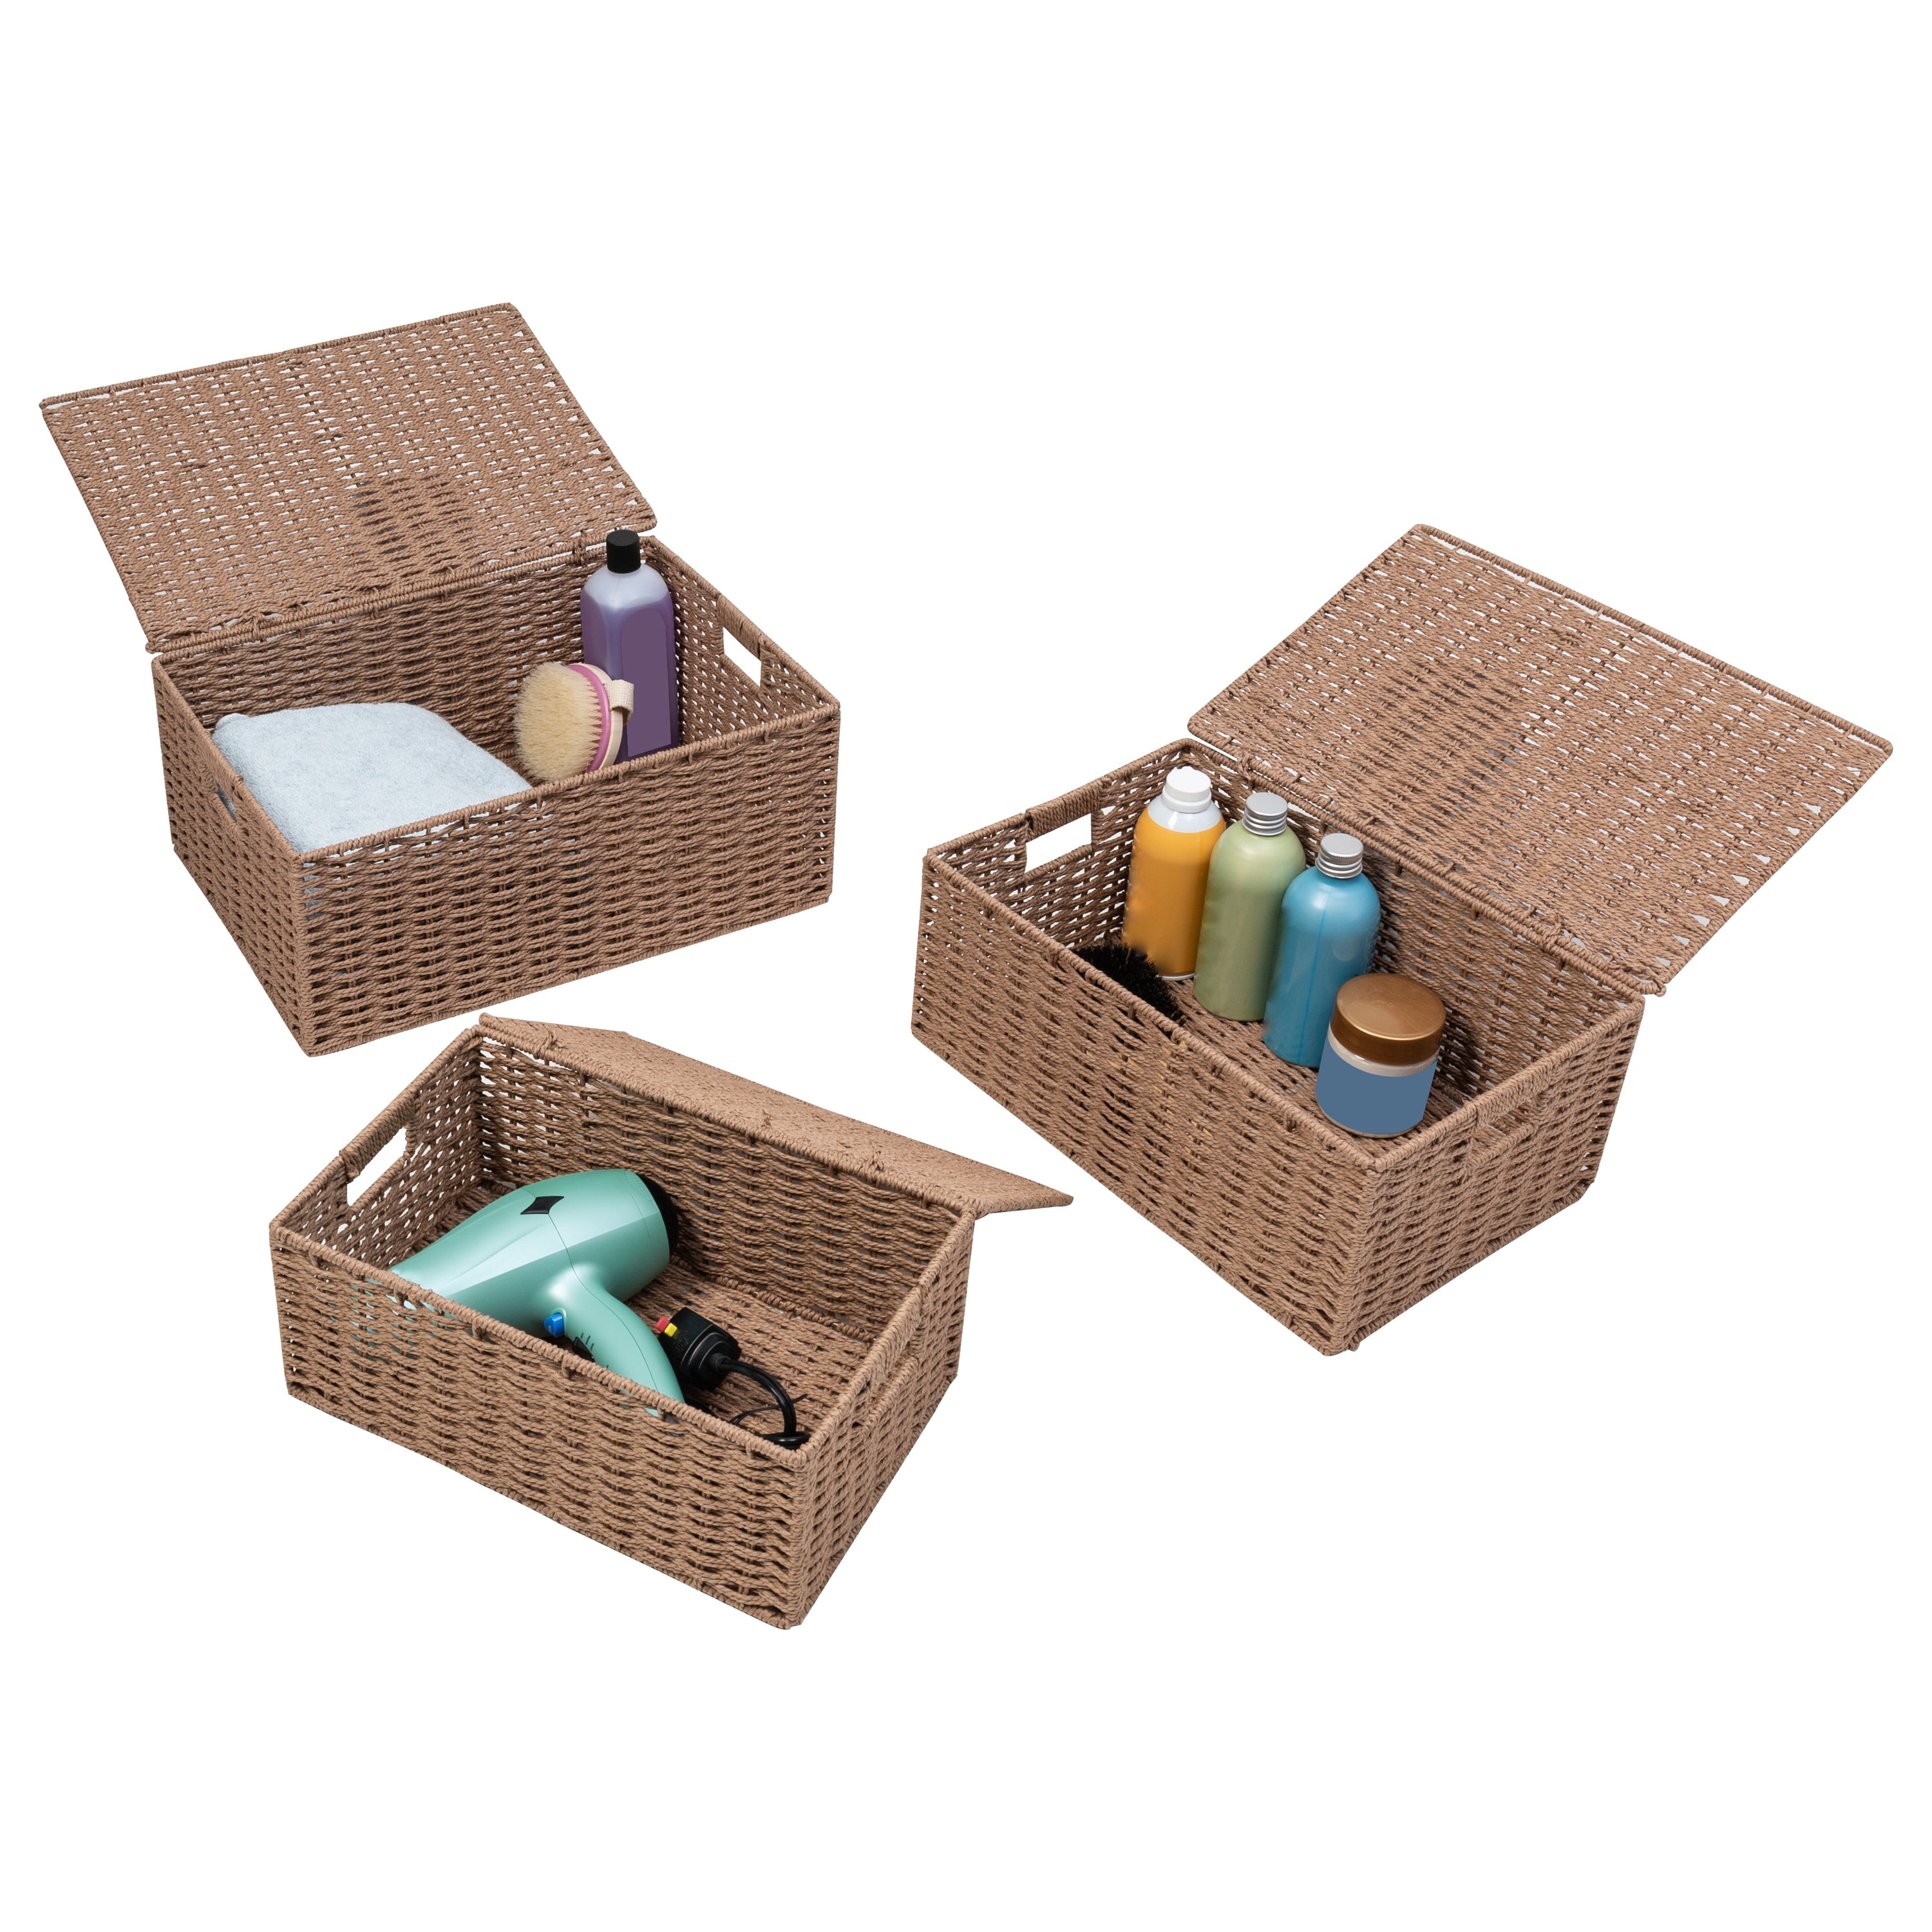 Honey-Can-Do 3-Piece Paper Rope Cord Basket Set